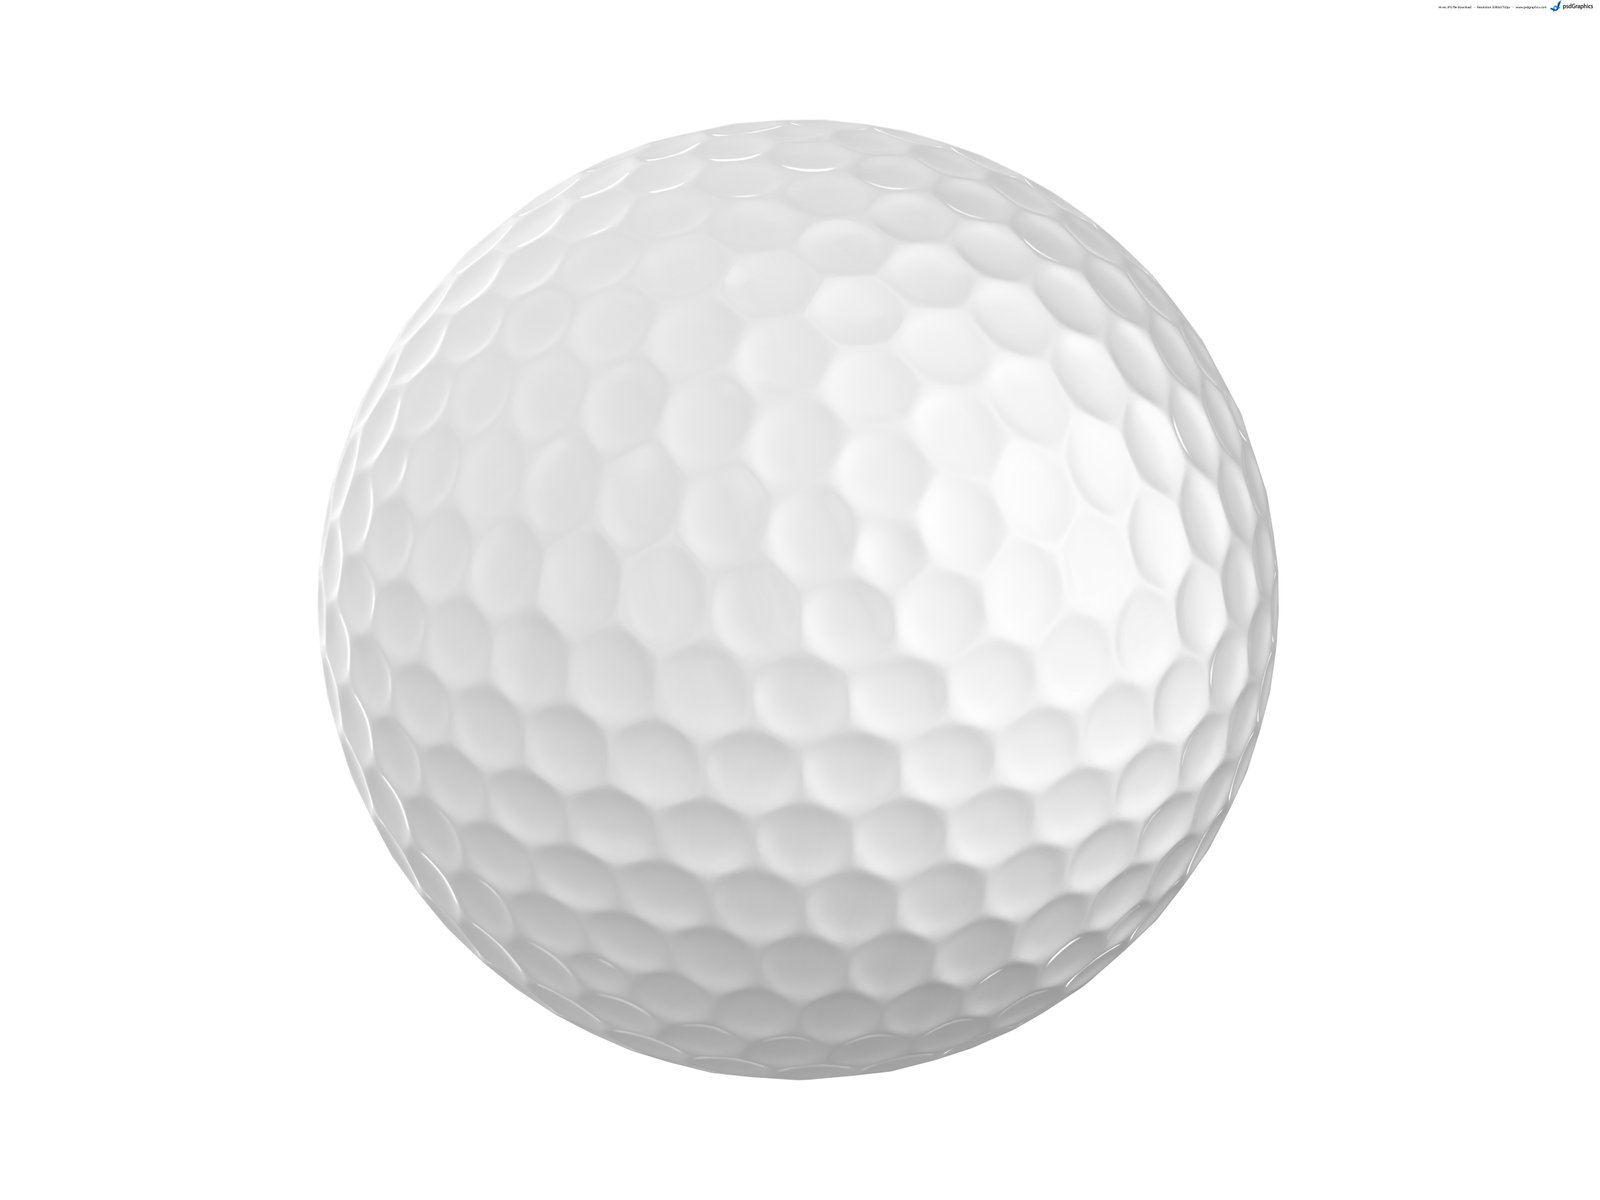 free clipart images golf ball jpg - photo #6